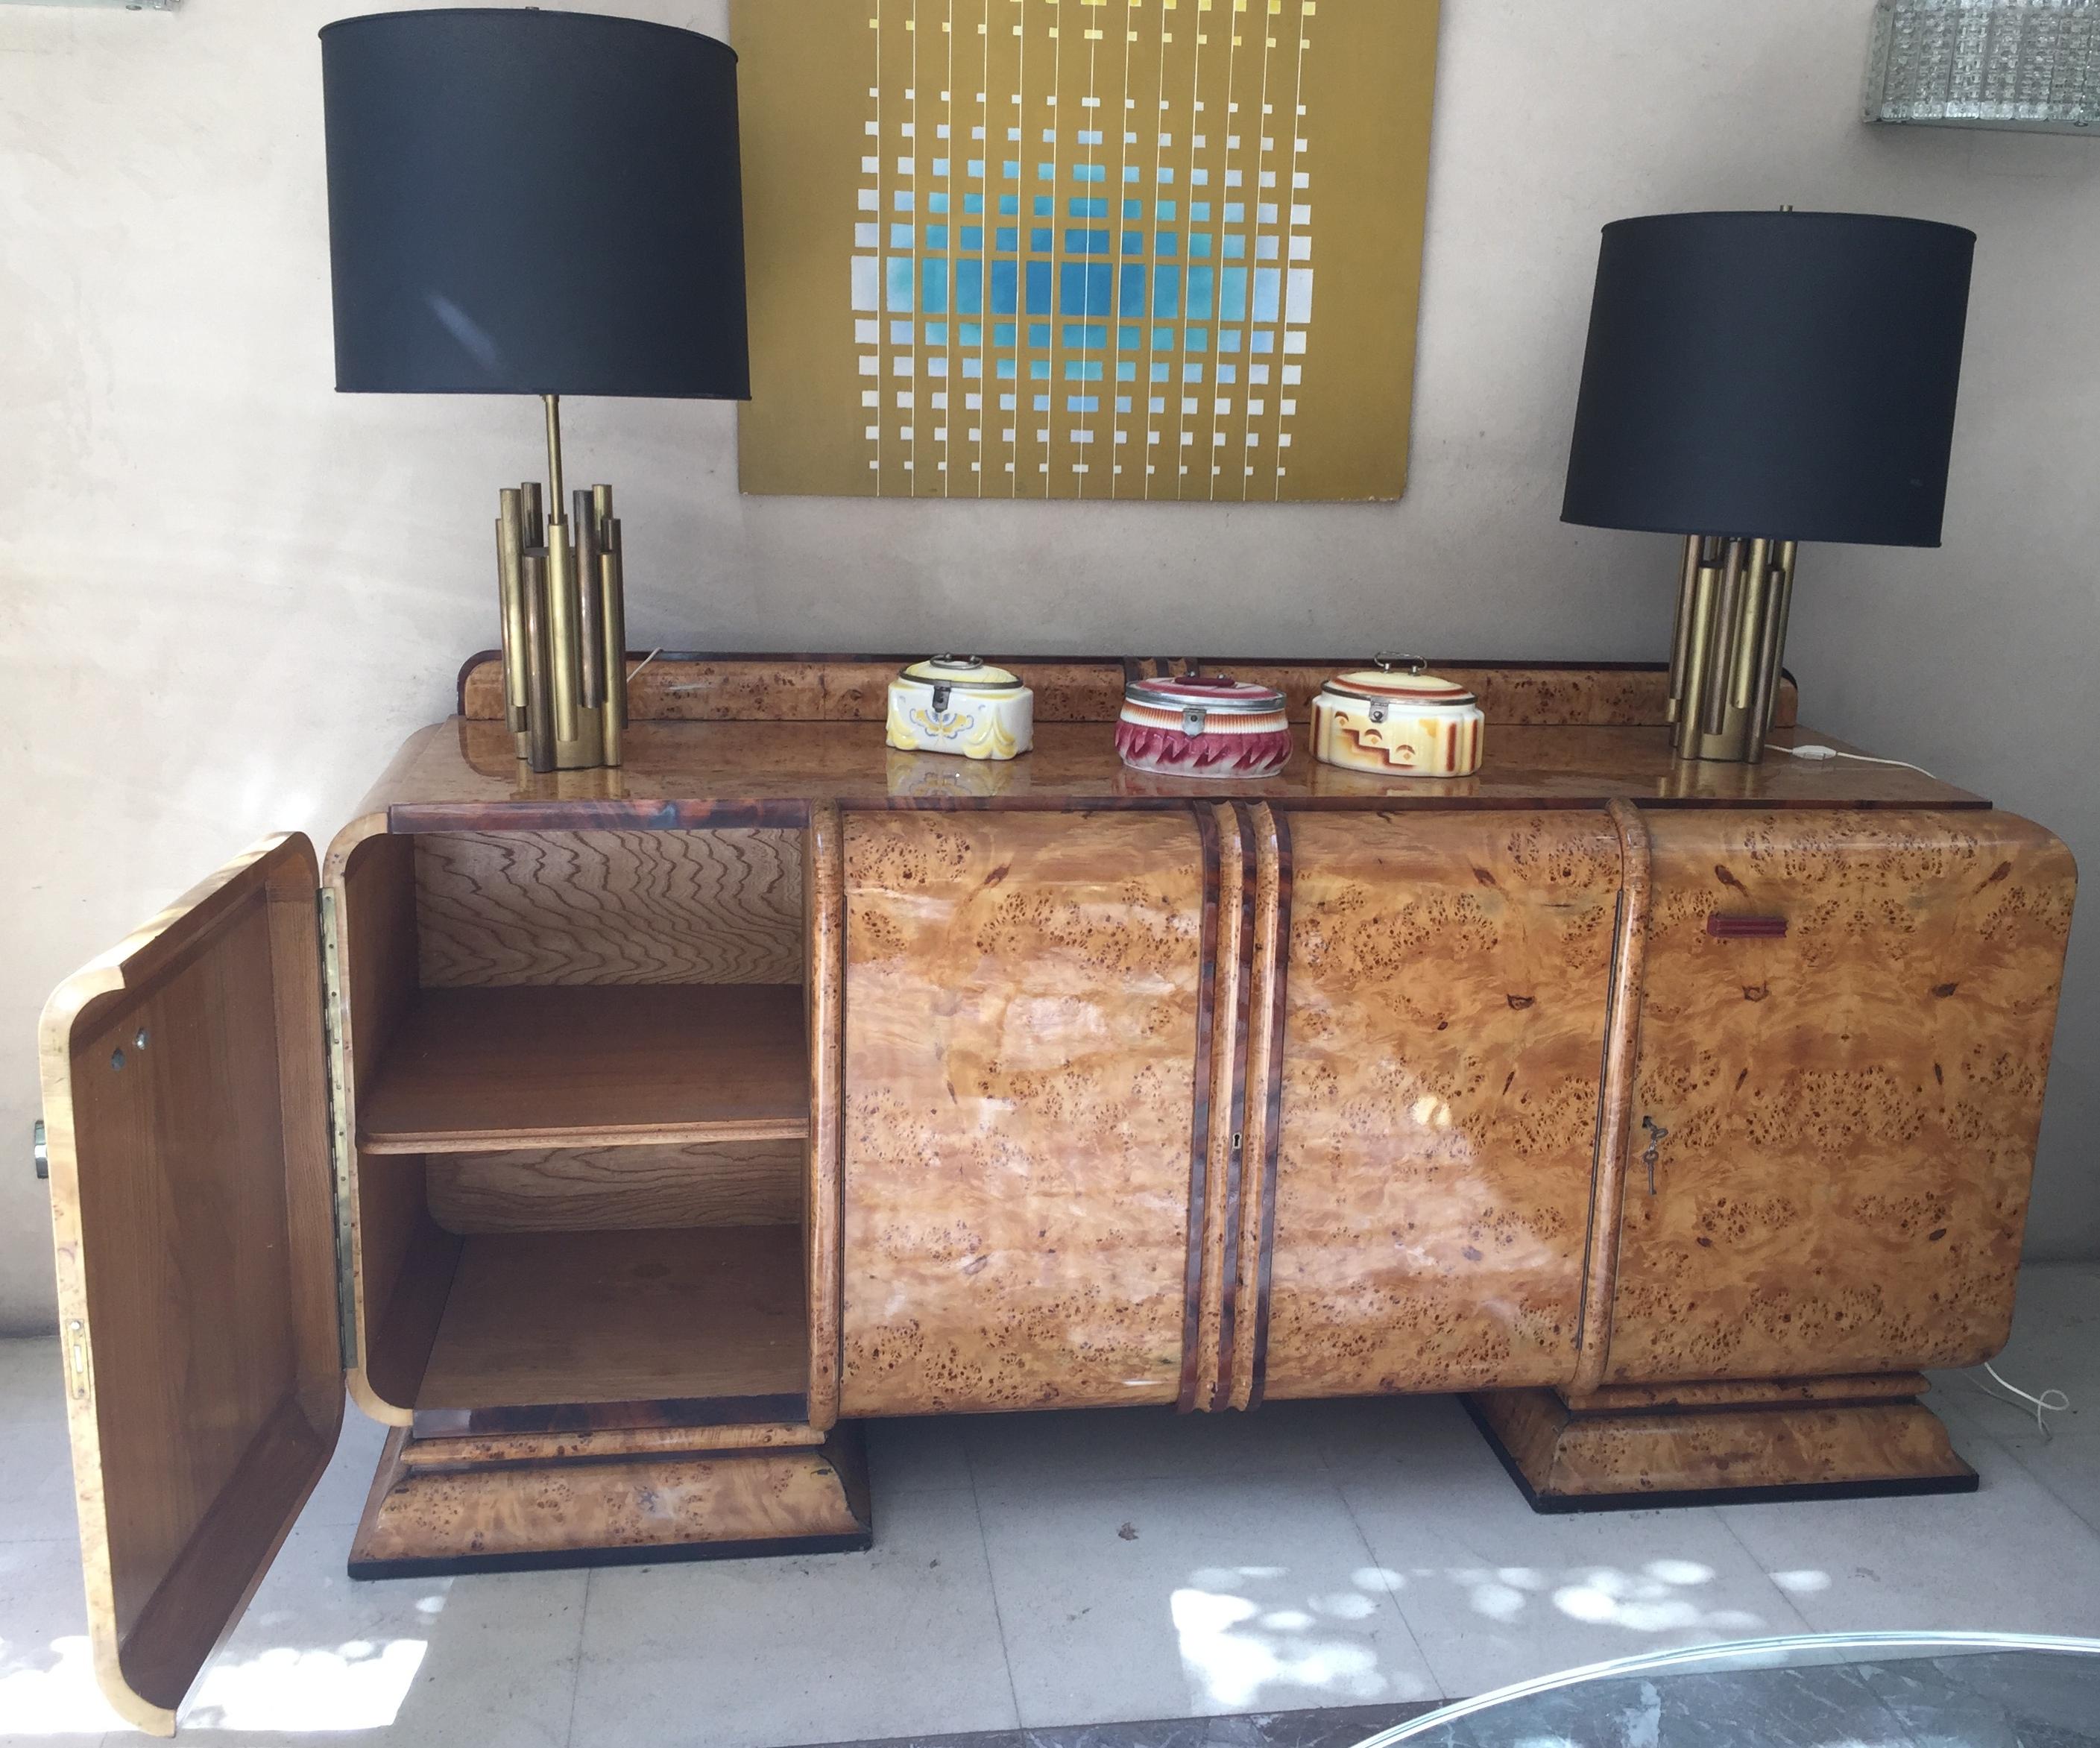 Amazing siderboard with bar in wood

Style: Art Deco
Year: 1930
Material: wood
If you want to live in the golden years, this is the siderboard that your project needs.
We have specialized in the sale of Art Deco and Art Nouveau styles since 1982.If